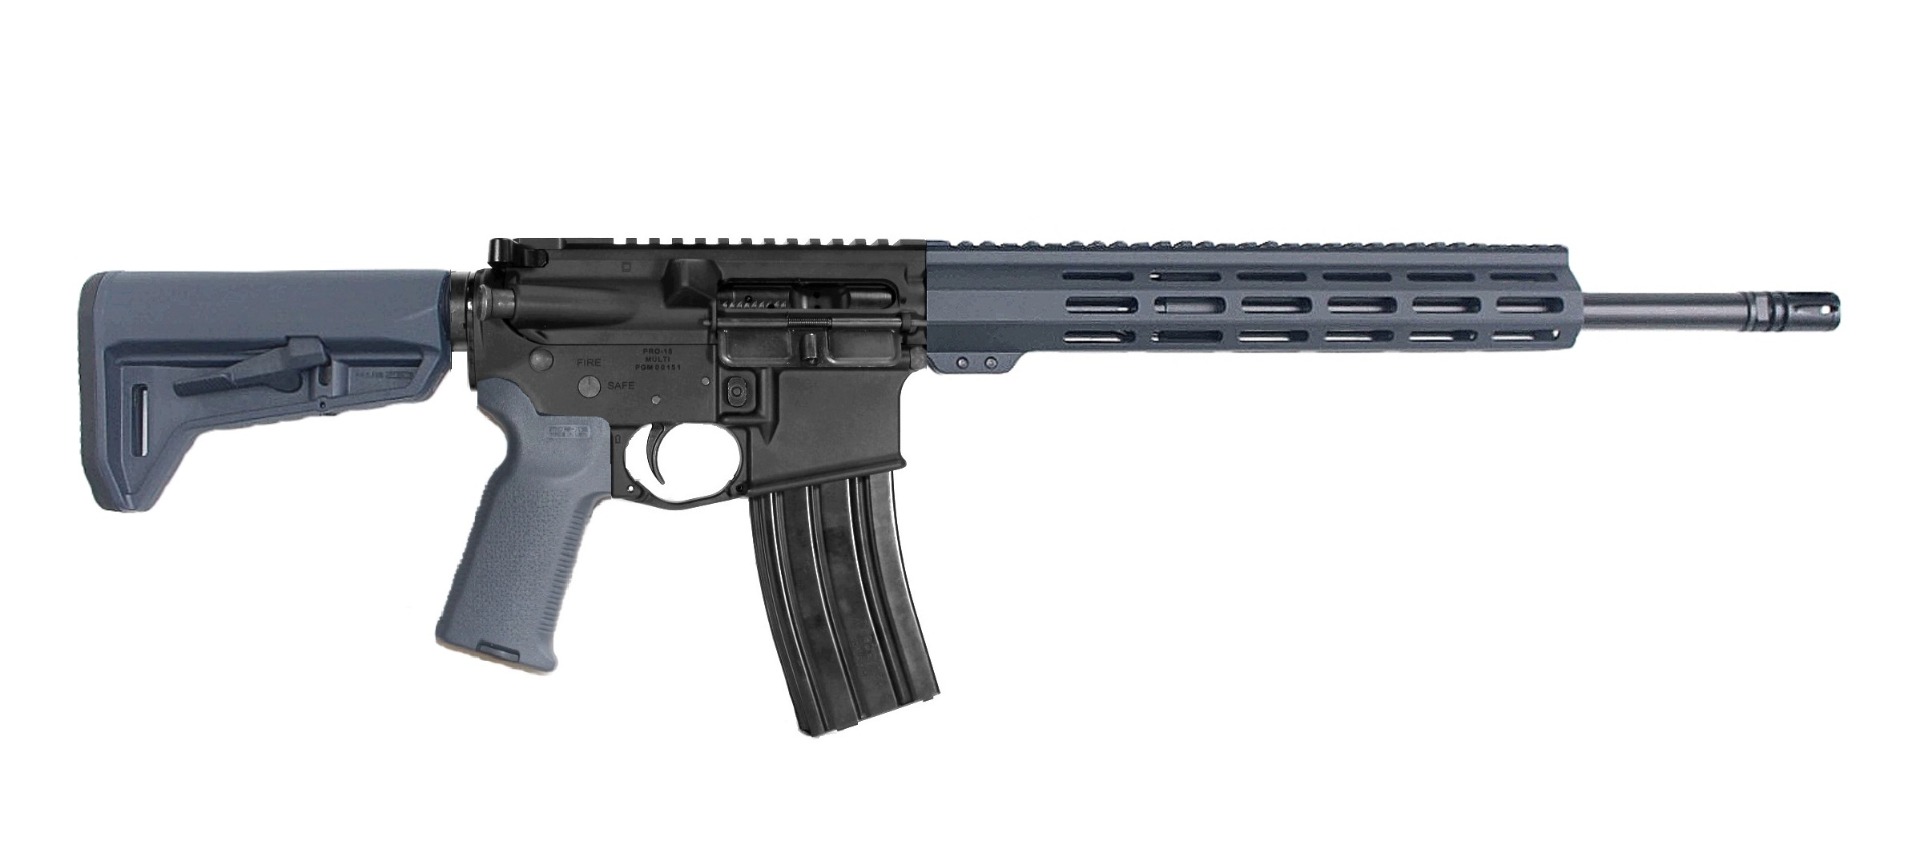 16 inch 300 Blackout AR-15 Rifle | In Stock | Fast Shipping